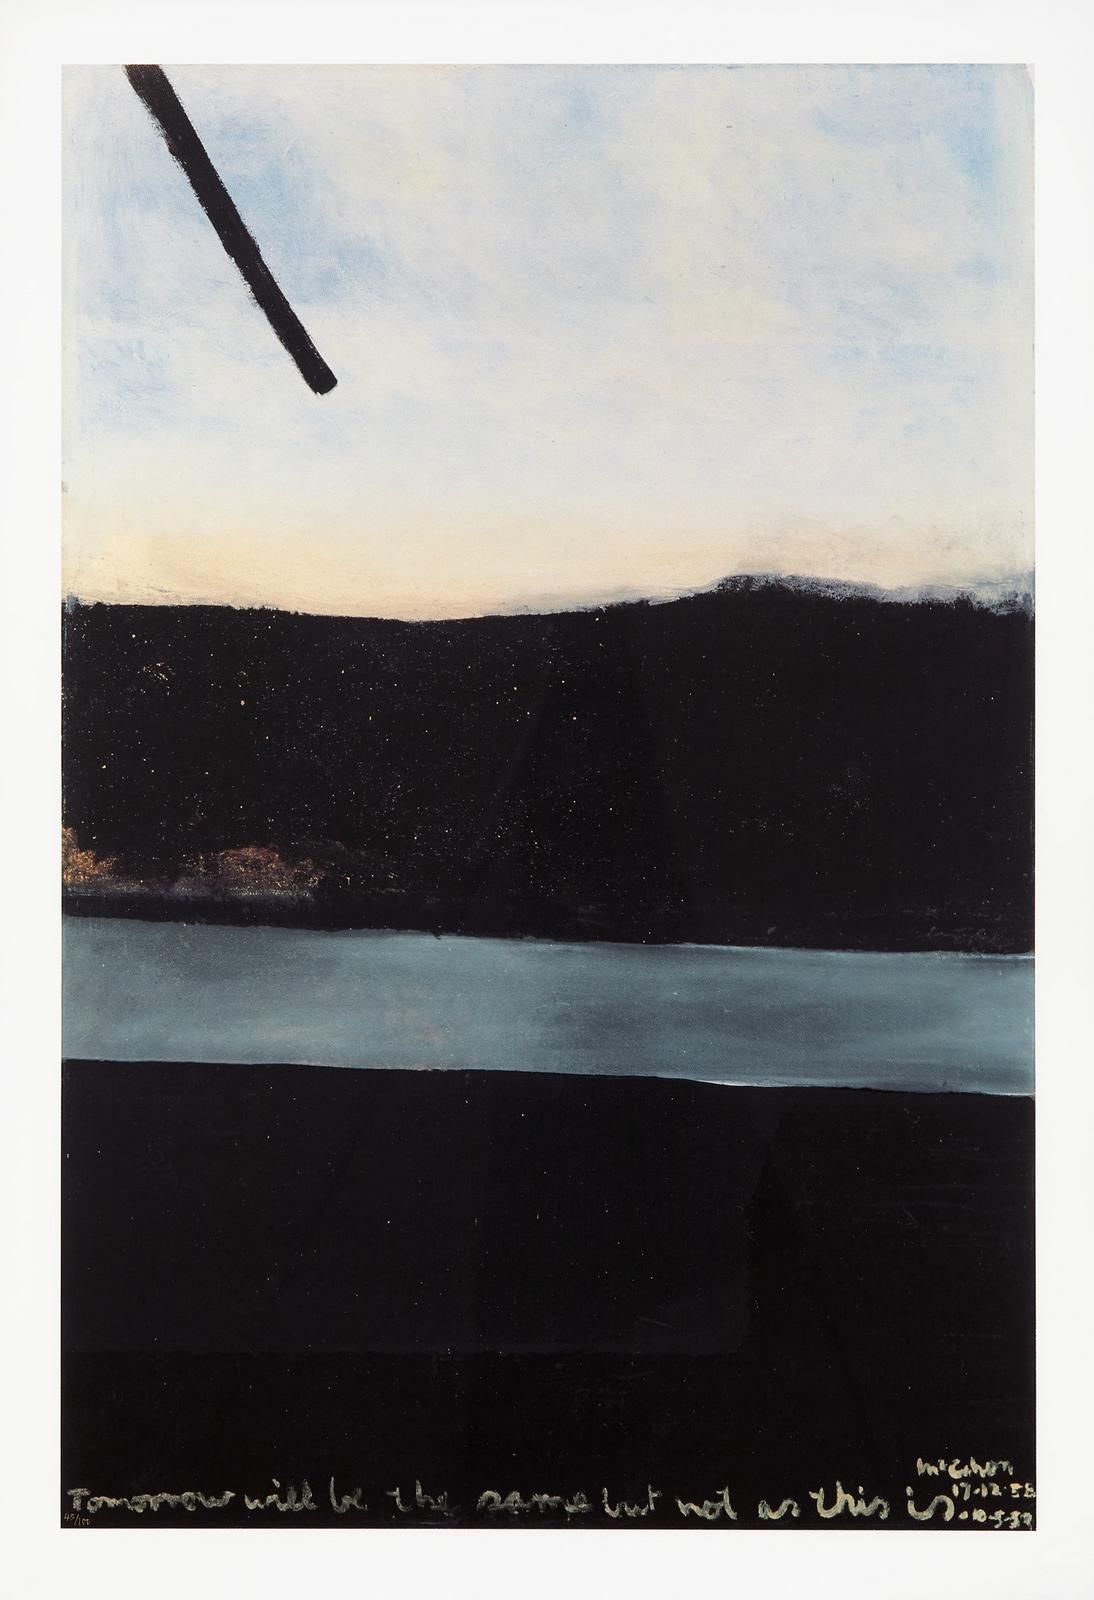 Colin McCahon's 1959 painting "Tomorrow will be the same but not as this is". A portrait orientation large painting shows a dark mountain range, a dark plain, and a grey strip like a body of water between them. The sky is bright, and there is a dark thick line protruding from the top left corner downwards at an angle, stopping two thirds of the way down the sky. Along the base is white thick script of the title